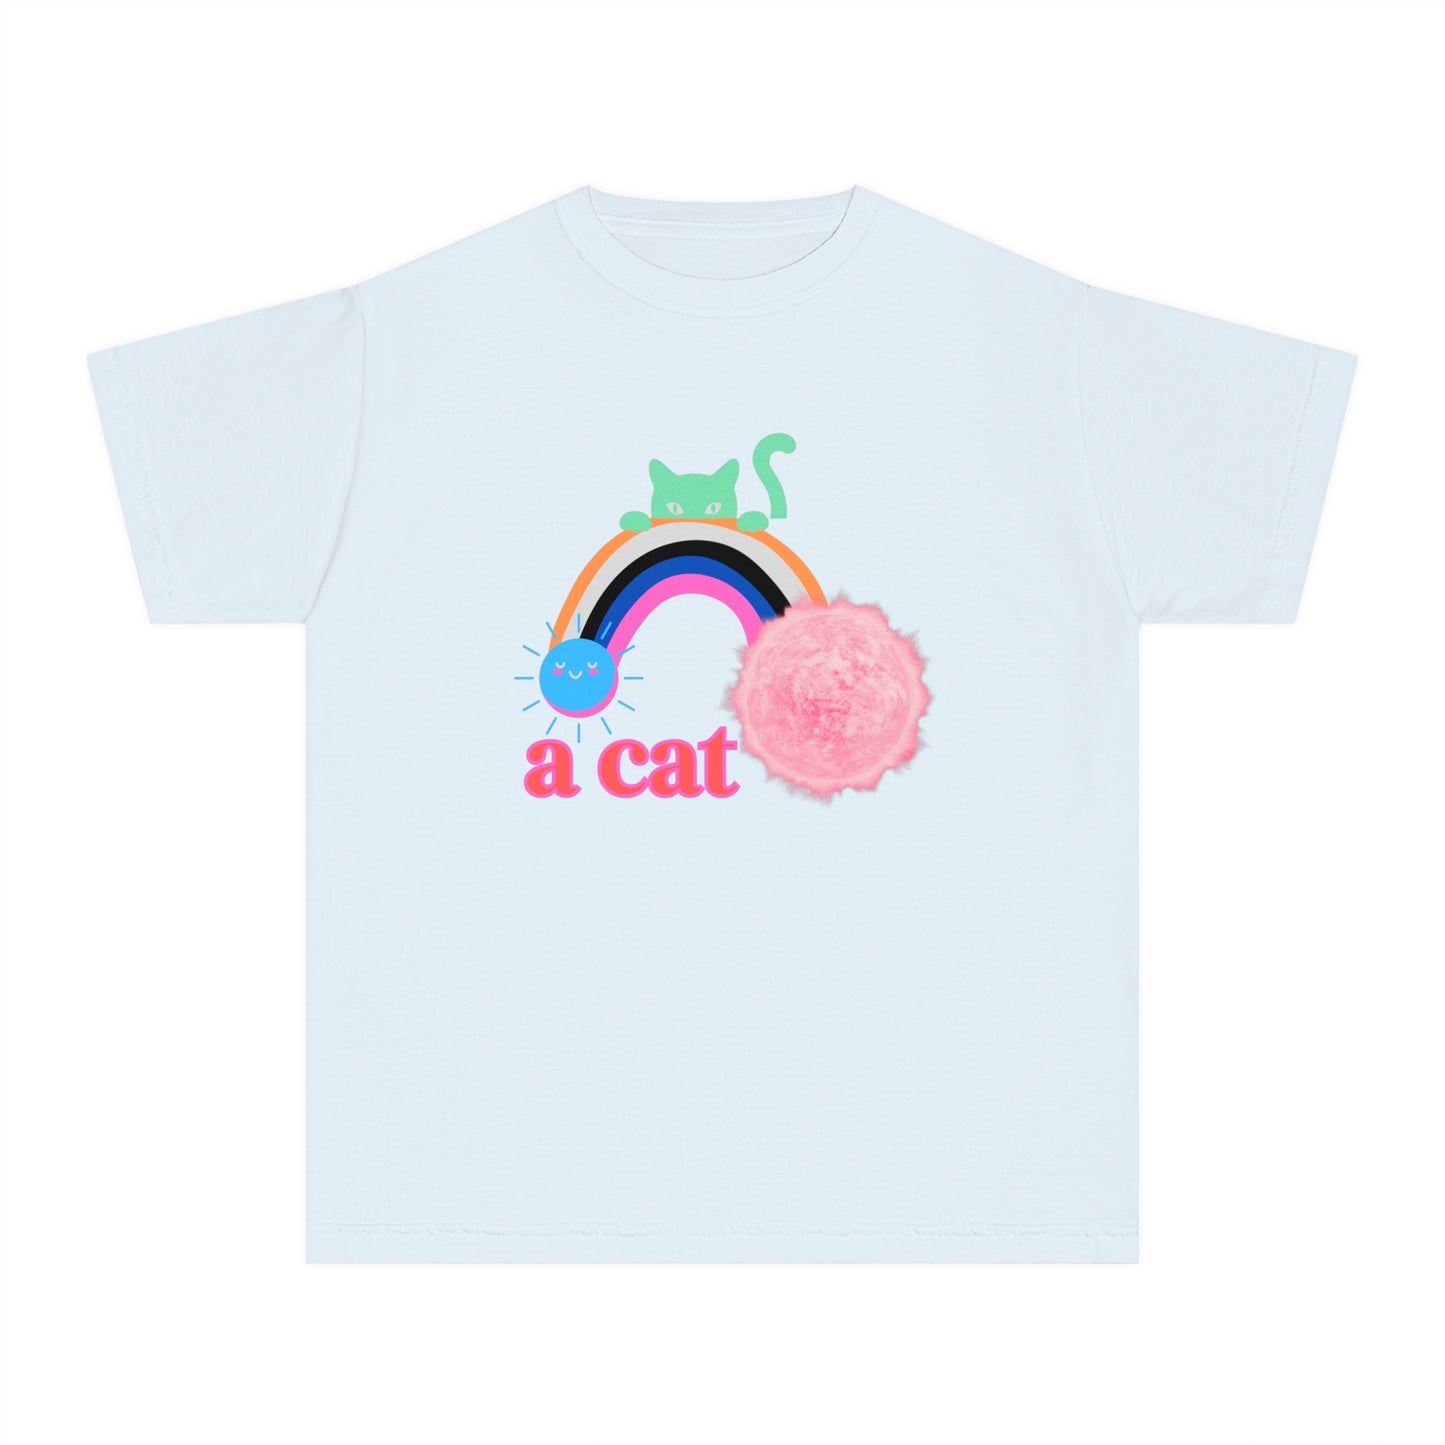 My 4-Year-Old Designed This Shirt - Kids Size